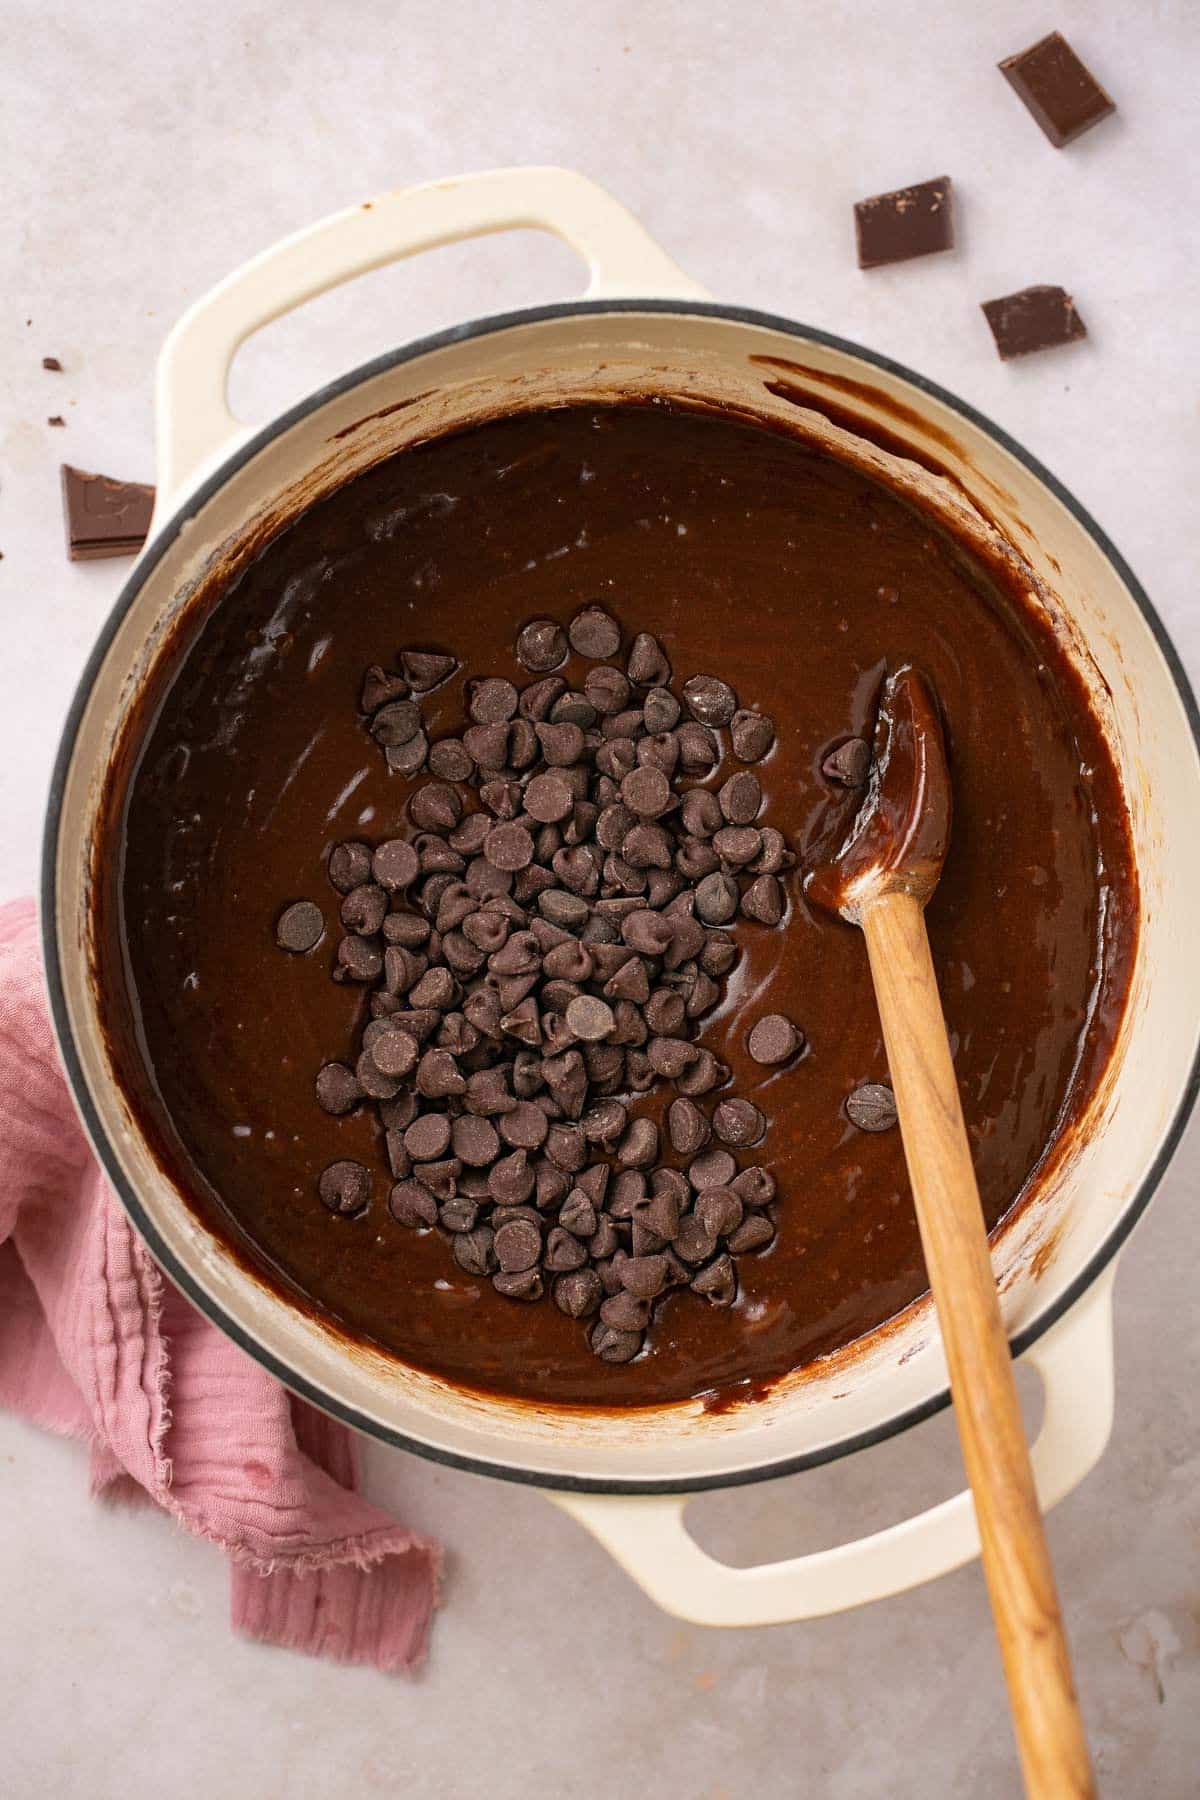 Using a wooden spoon to stir chocolate chips into brownie batter.